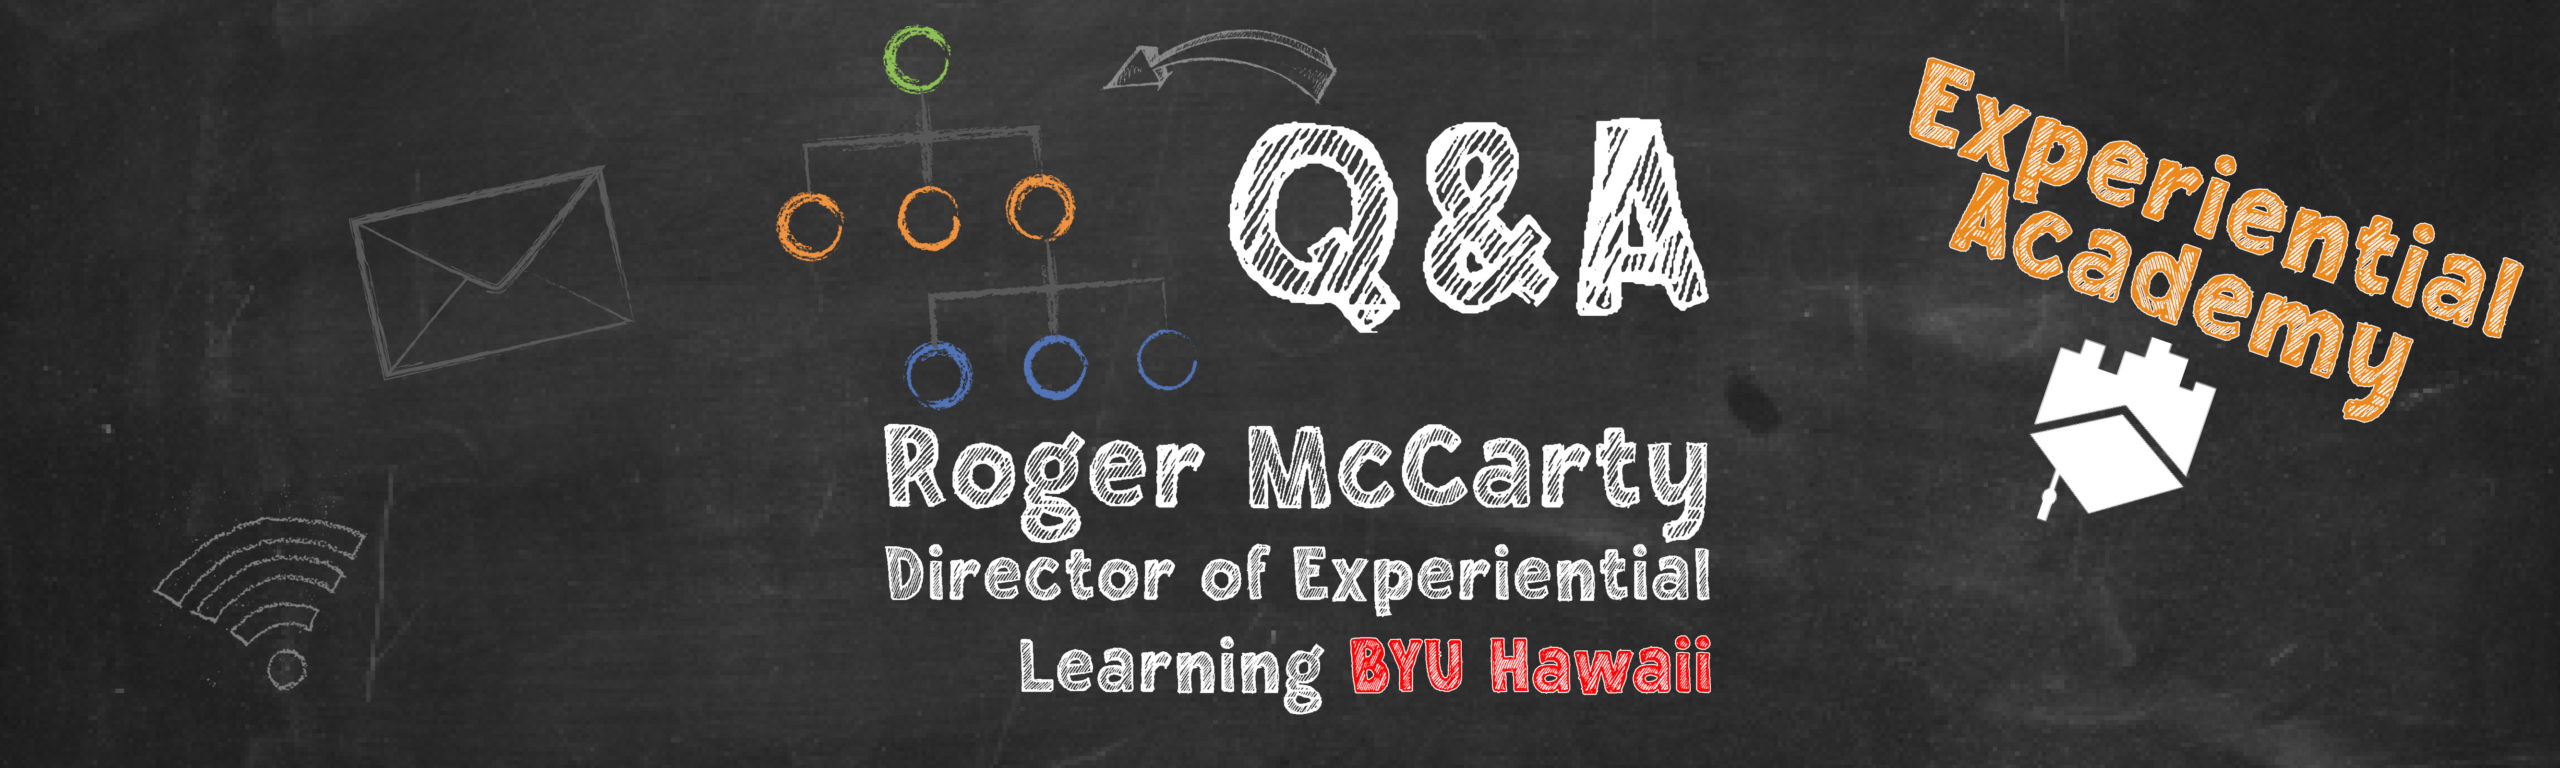 Q&A with Roger McCarty from BYU